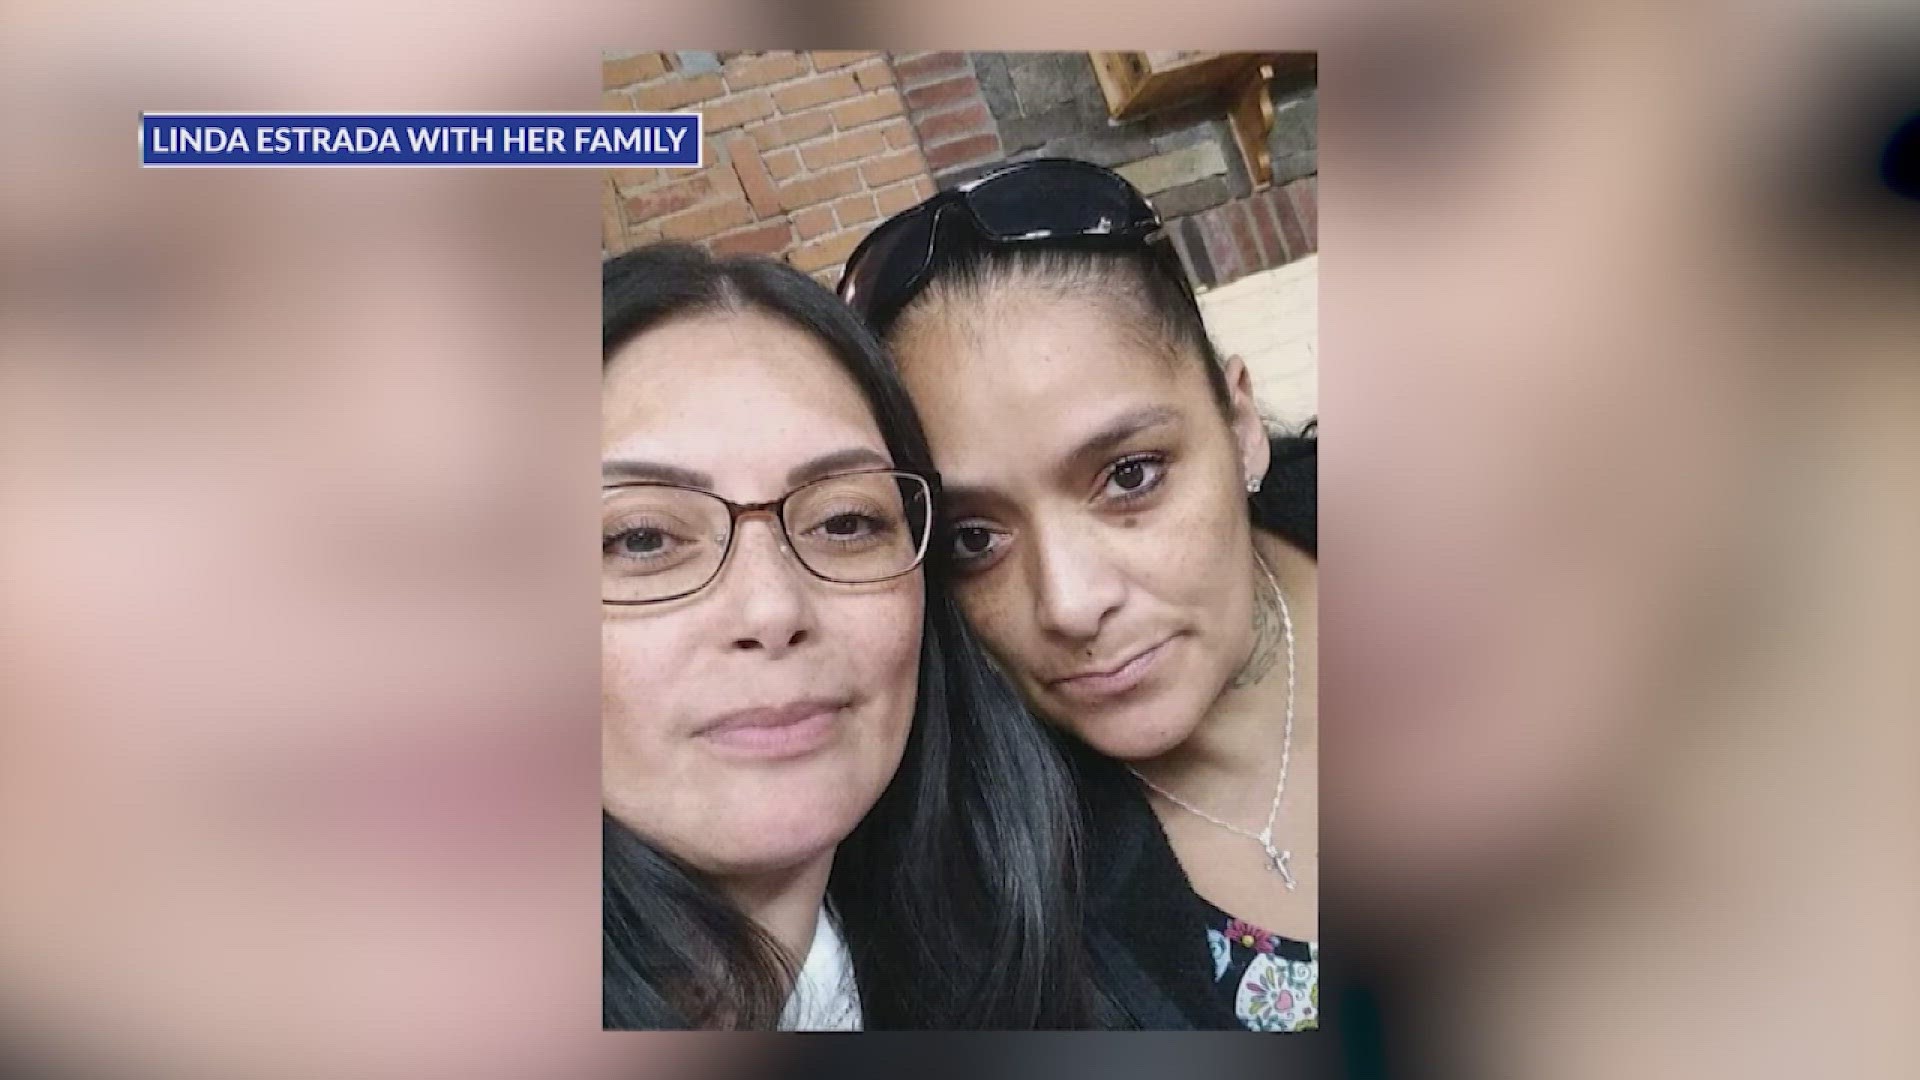 Linda Estrada and Amy Ford were reporting missed on Sept. 11 while visiting Colorado. Law enforcement found their remains in Kiowa County last Wednesday.